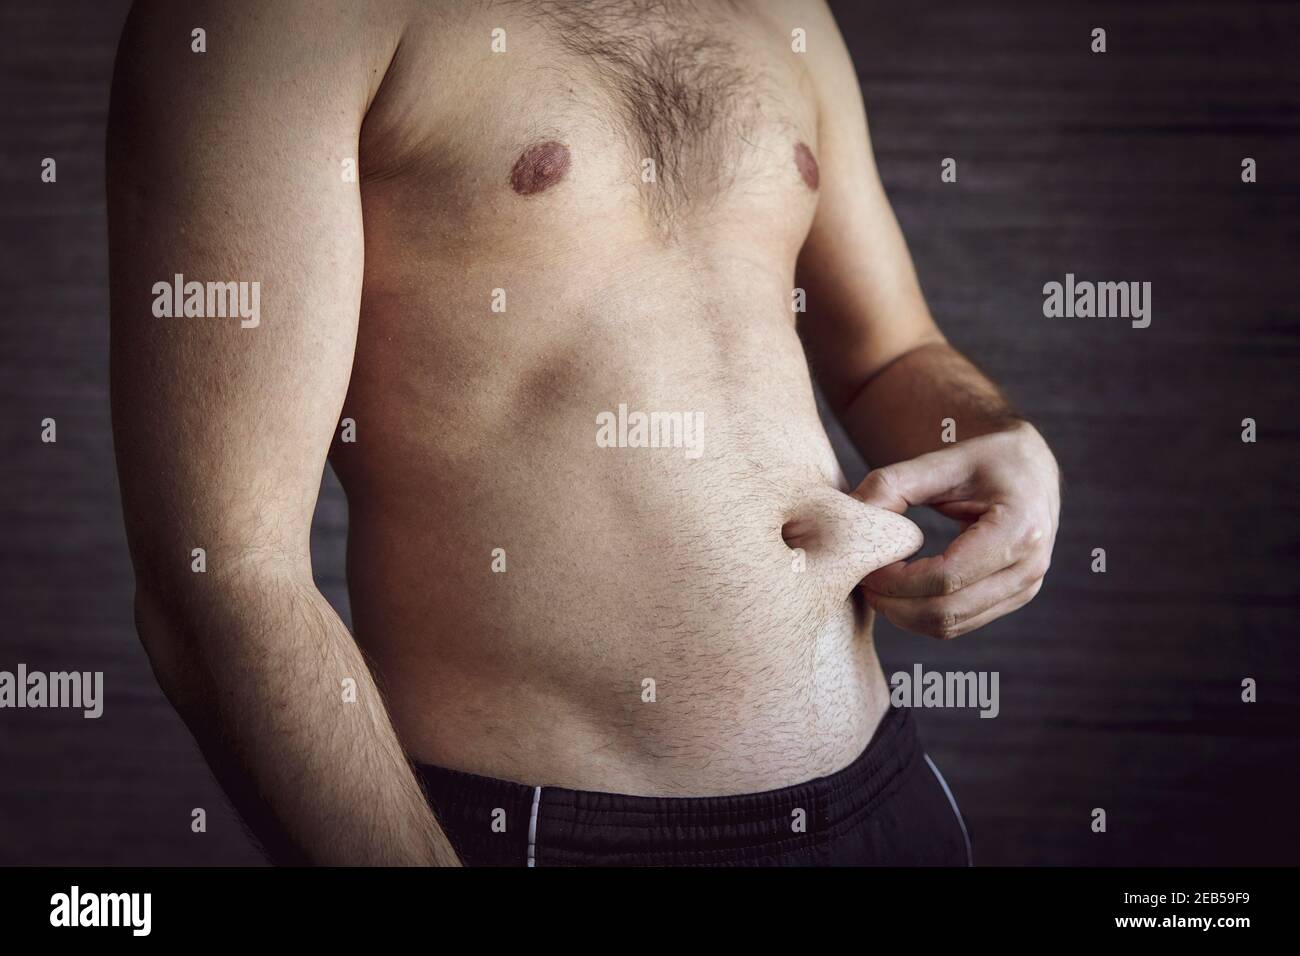 An adult male squeezes a fold of fat on his stomach. a man with a good figure squeezes the skin on his stomach. Stock Photo